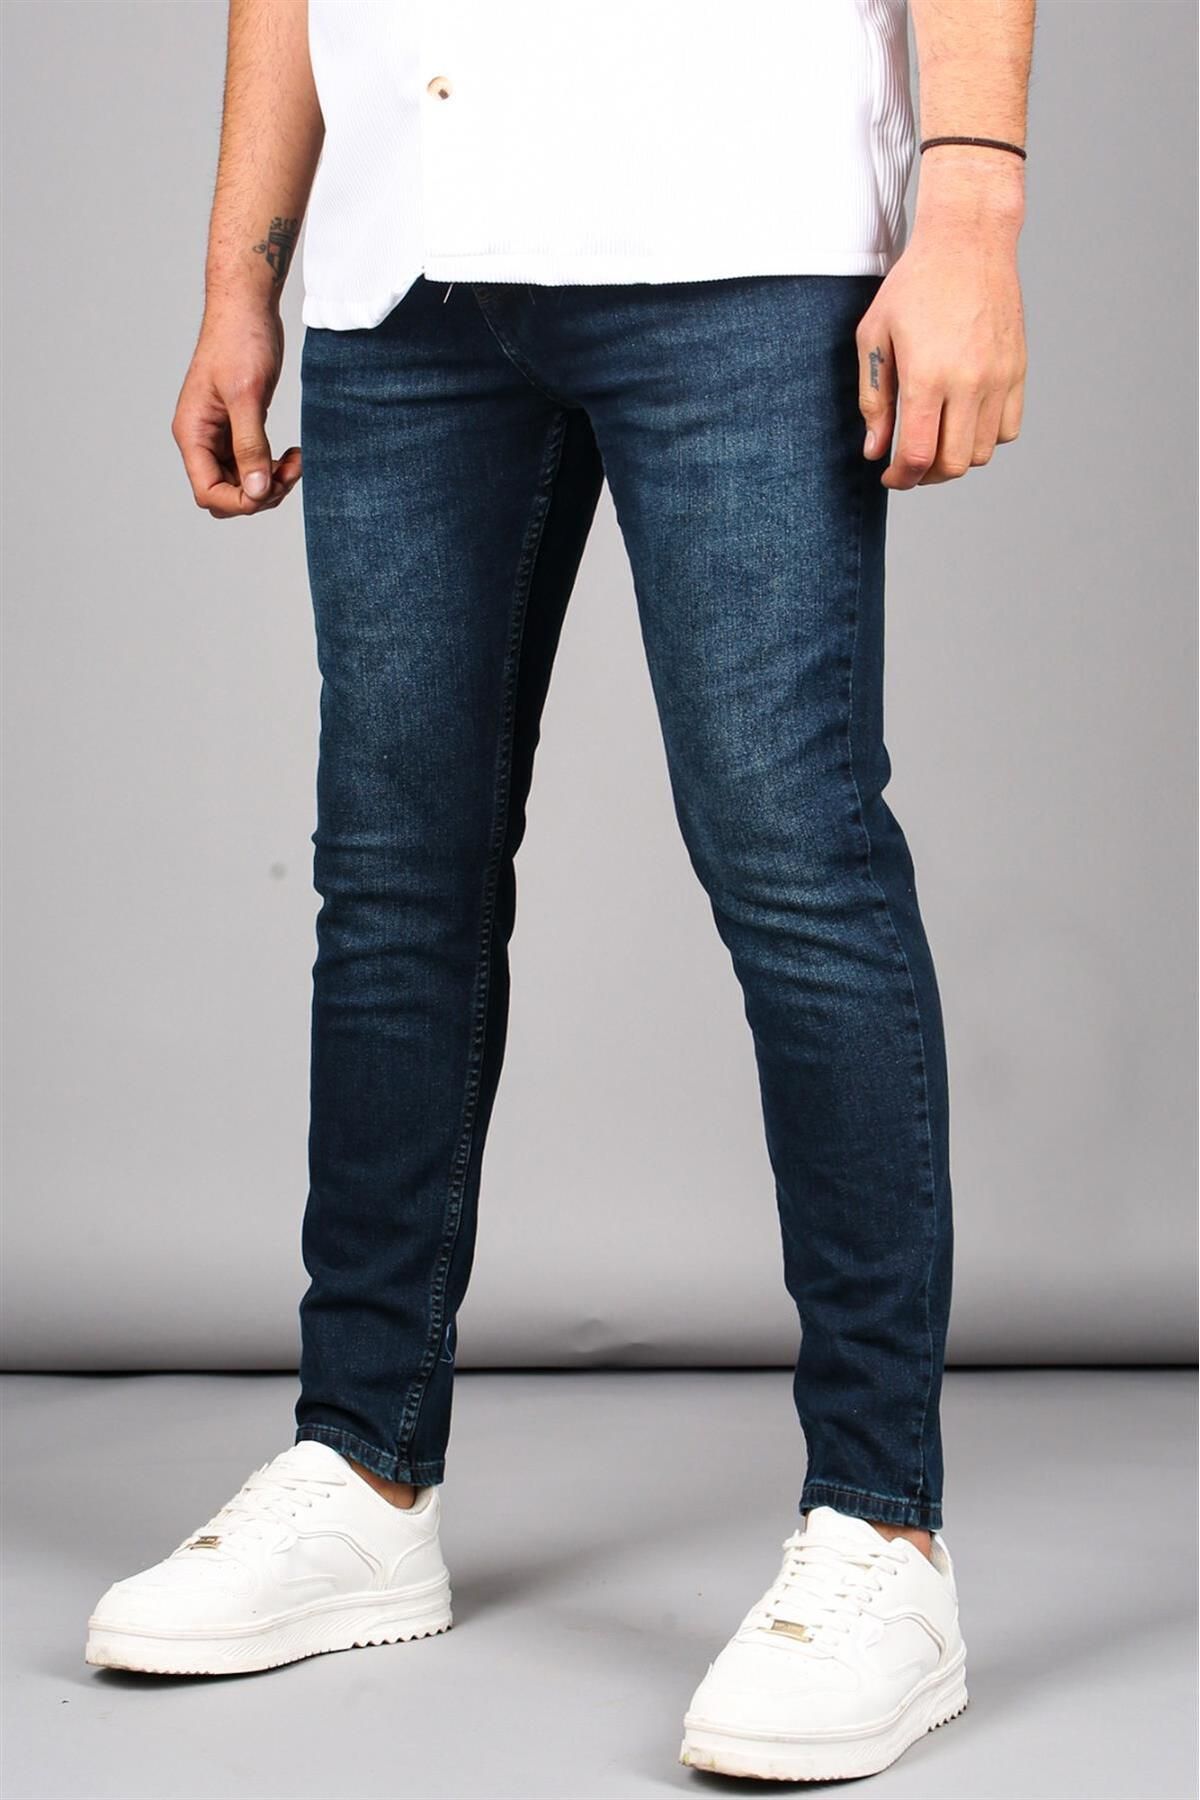 Casual Skinny Jeans Trousers Classica Denim Pants Washed Stretch Jeans for  Men - China Casual Pant and Jogging Sport Pants price